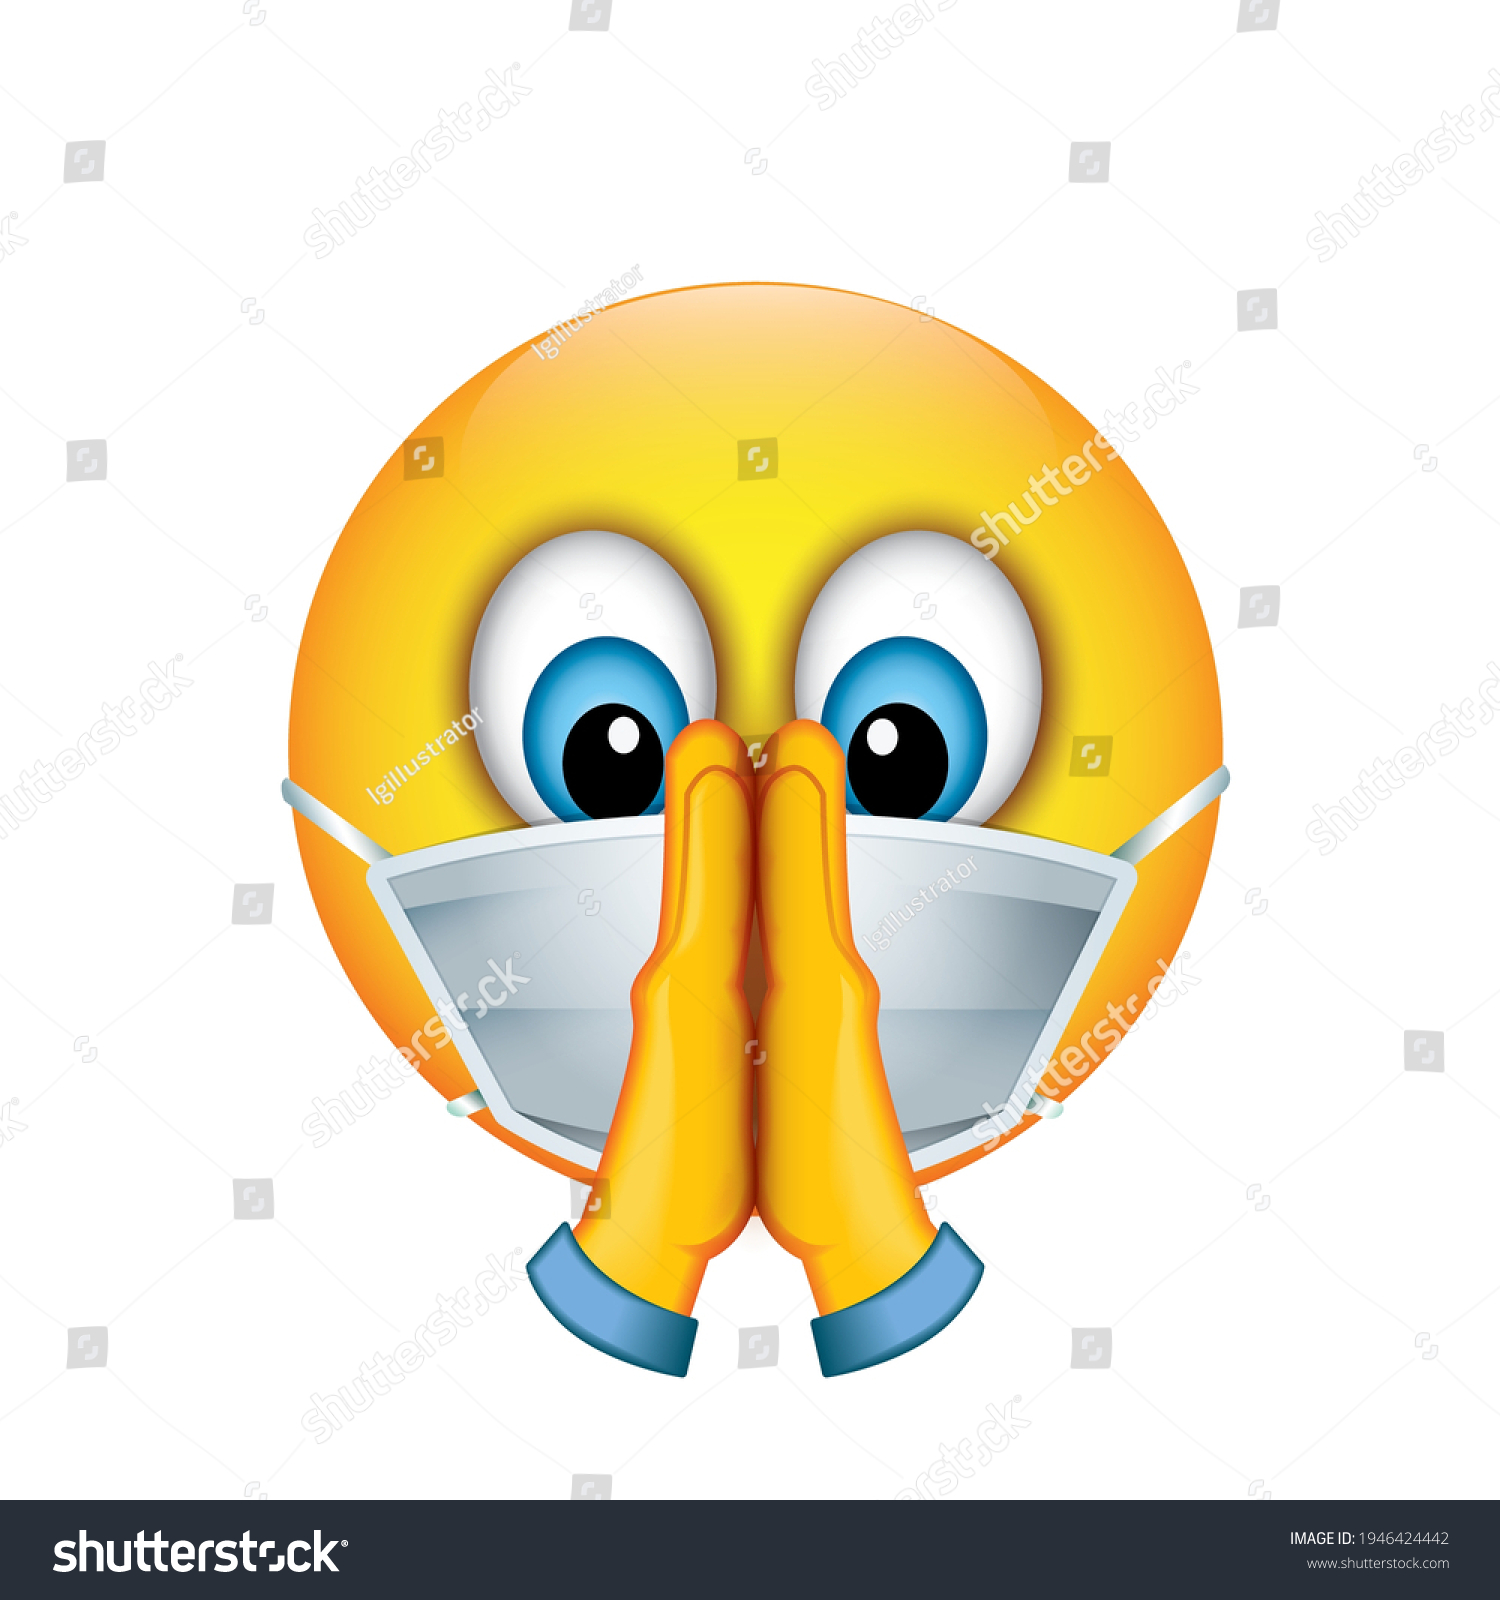 Cute Emoticon Wearing Surgical Mask Emoji Stock Vector Royalty Free 1946424442 8803